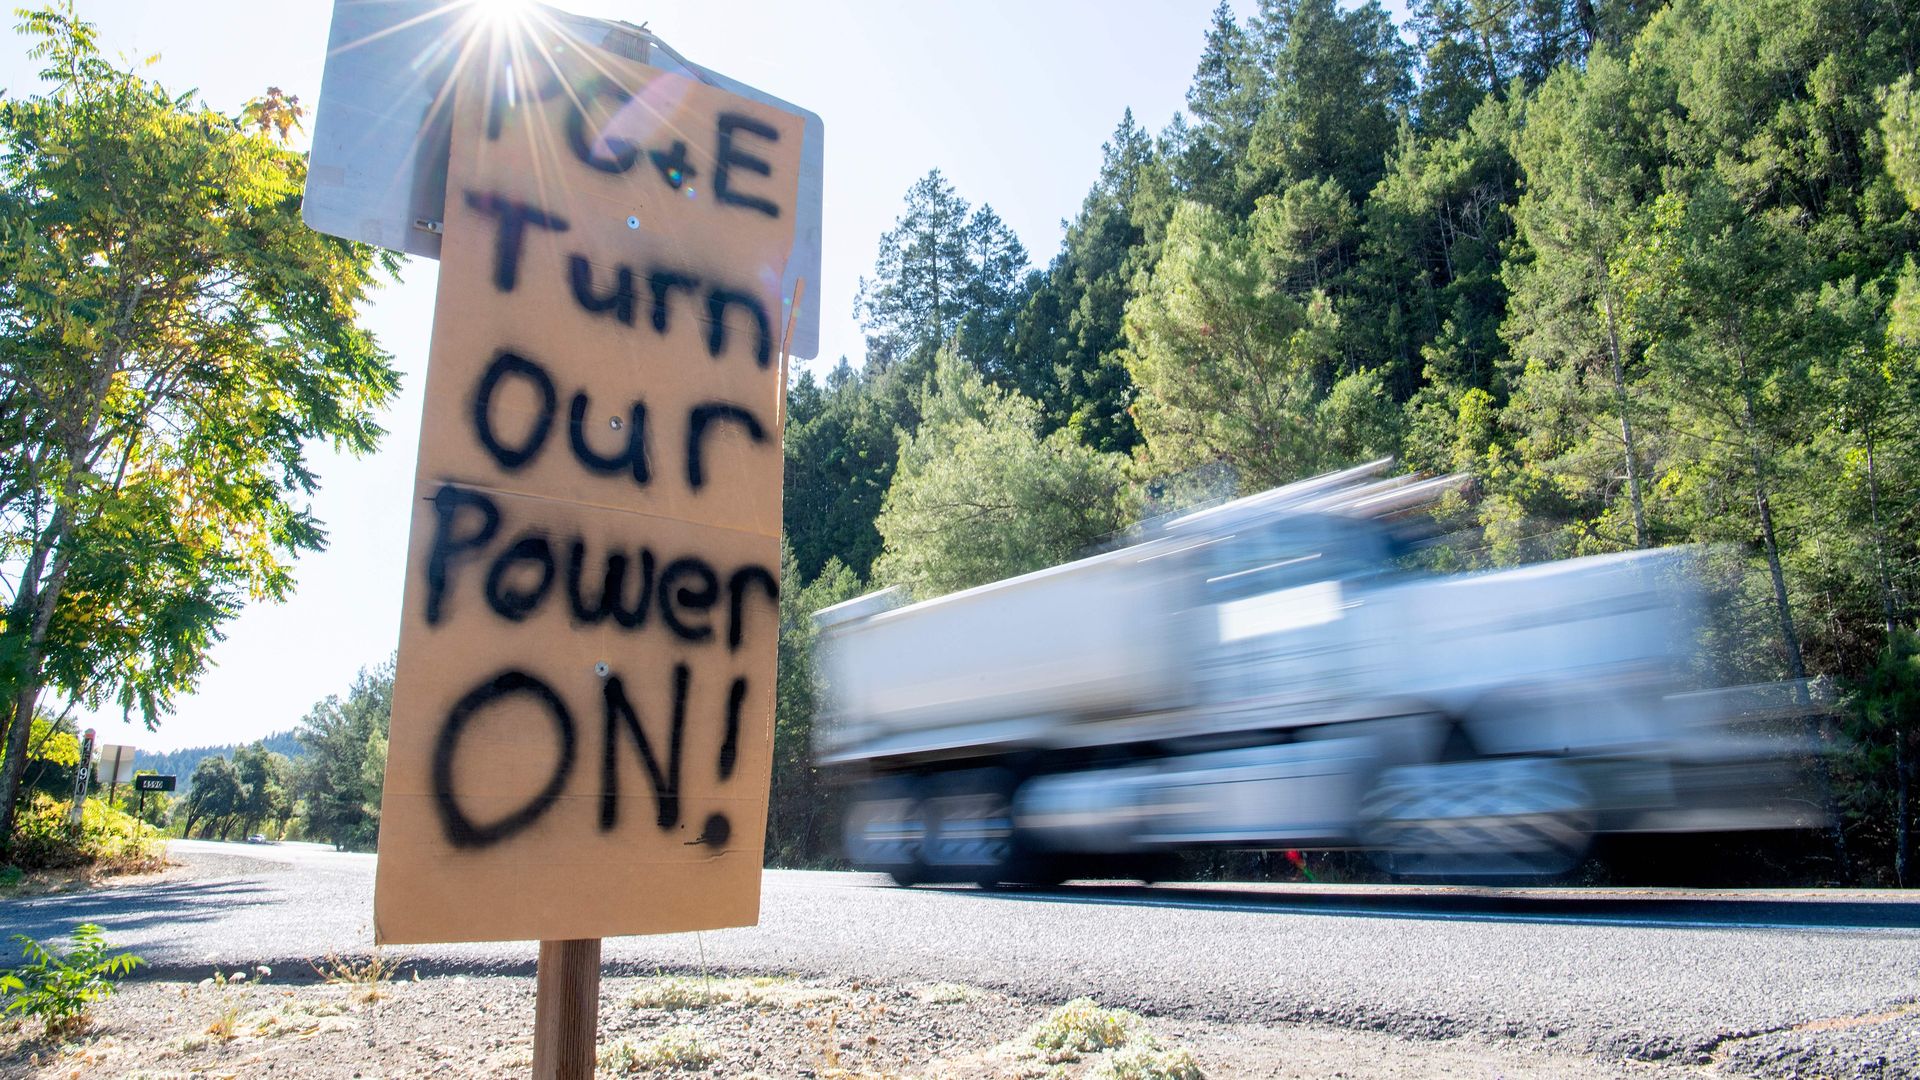 A sign calling for PG&E to turn the power back on is seen on the side of the road during a statewide blackout in Calistoga, California, on October, 10, 2019 